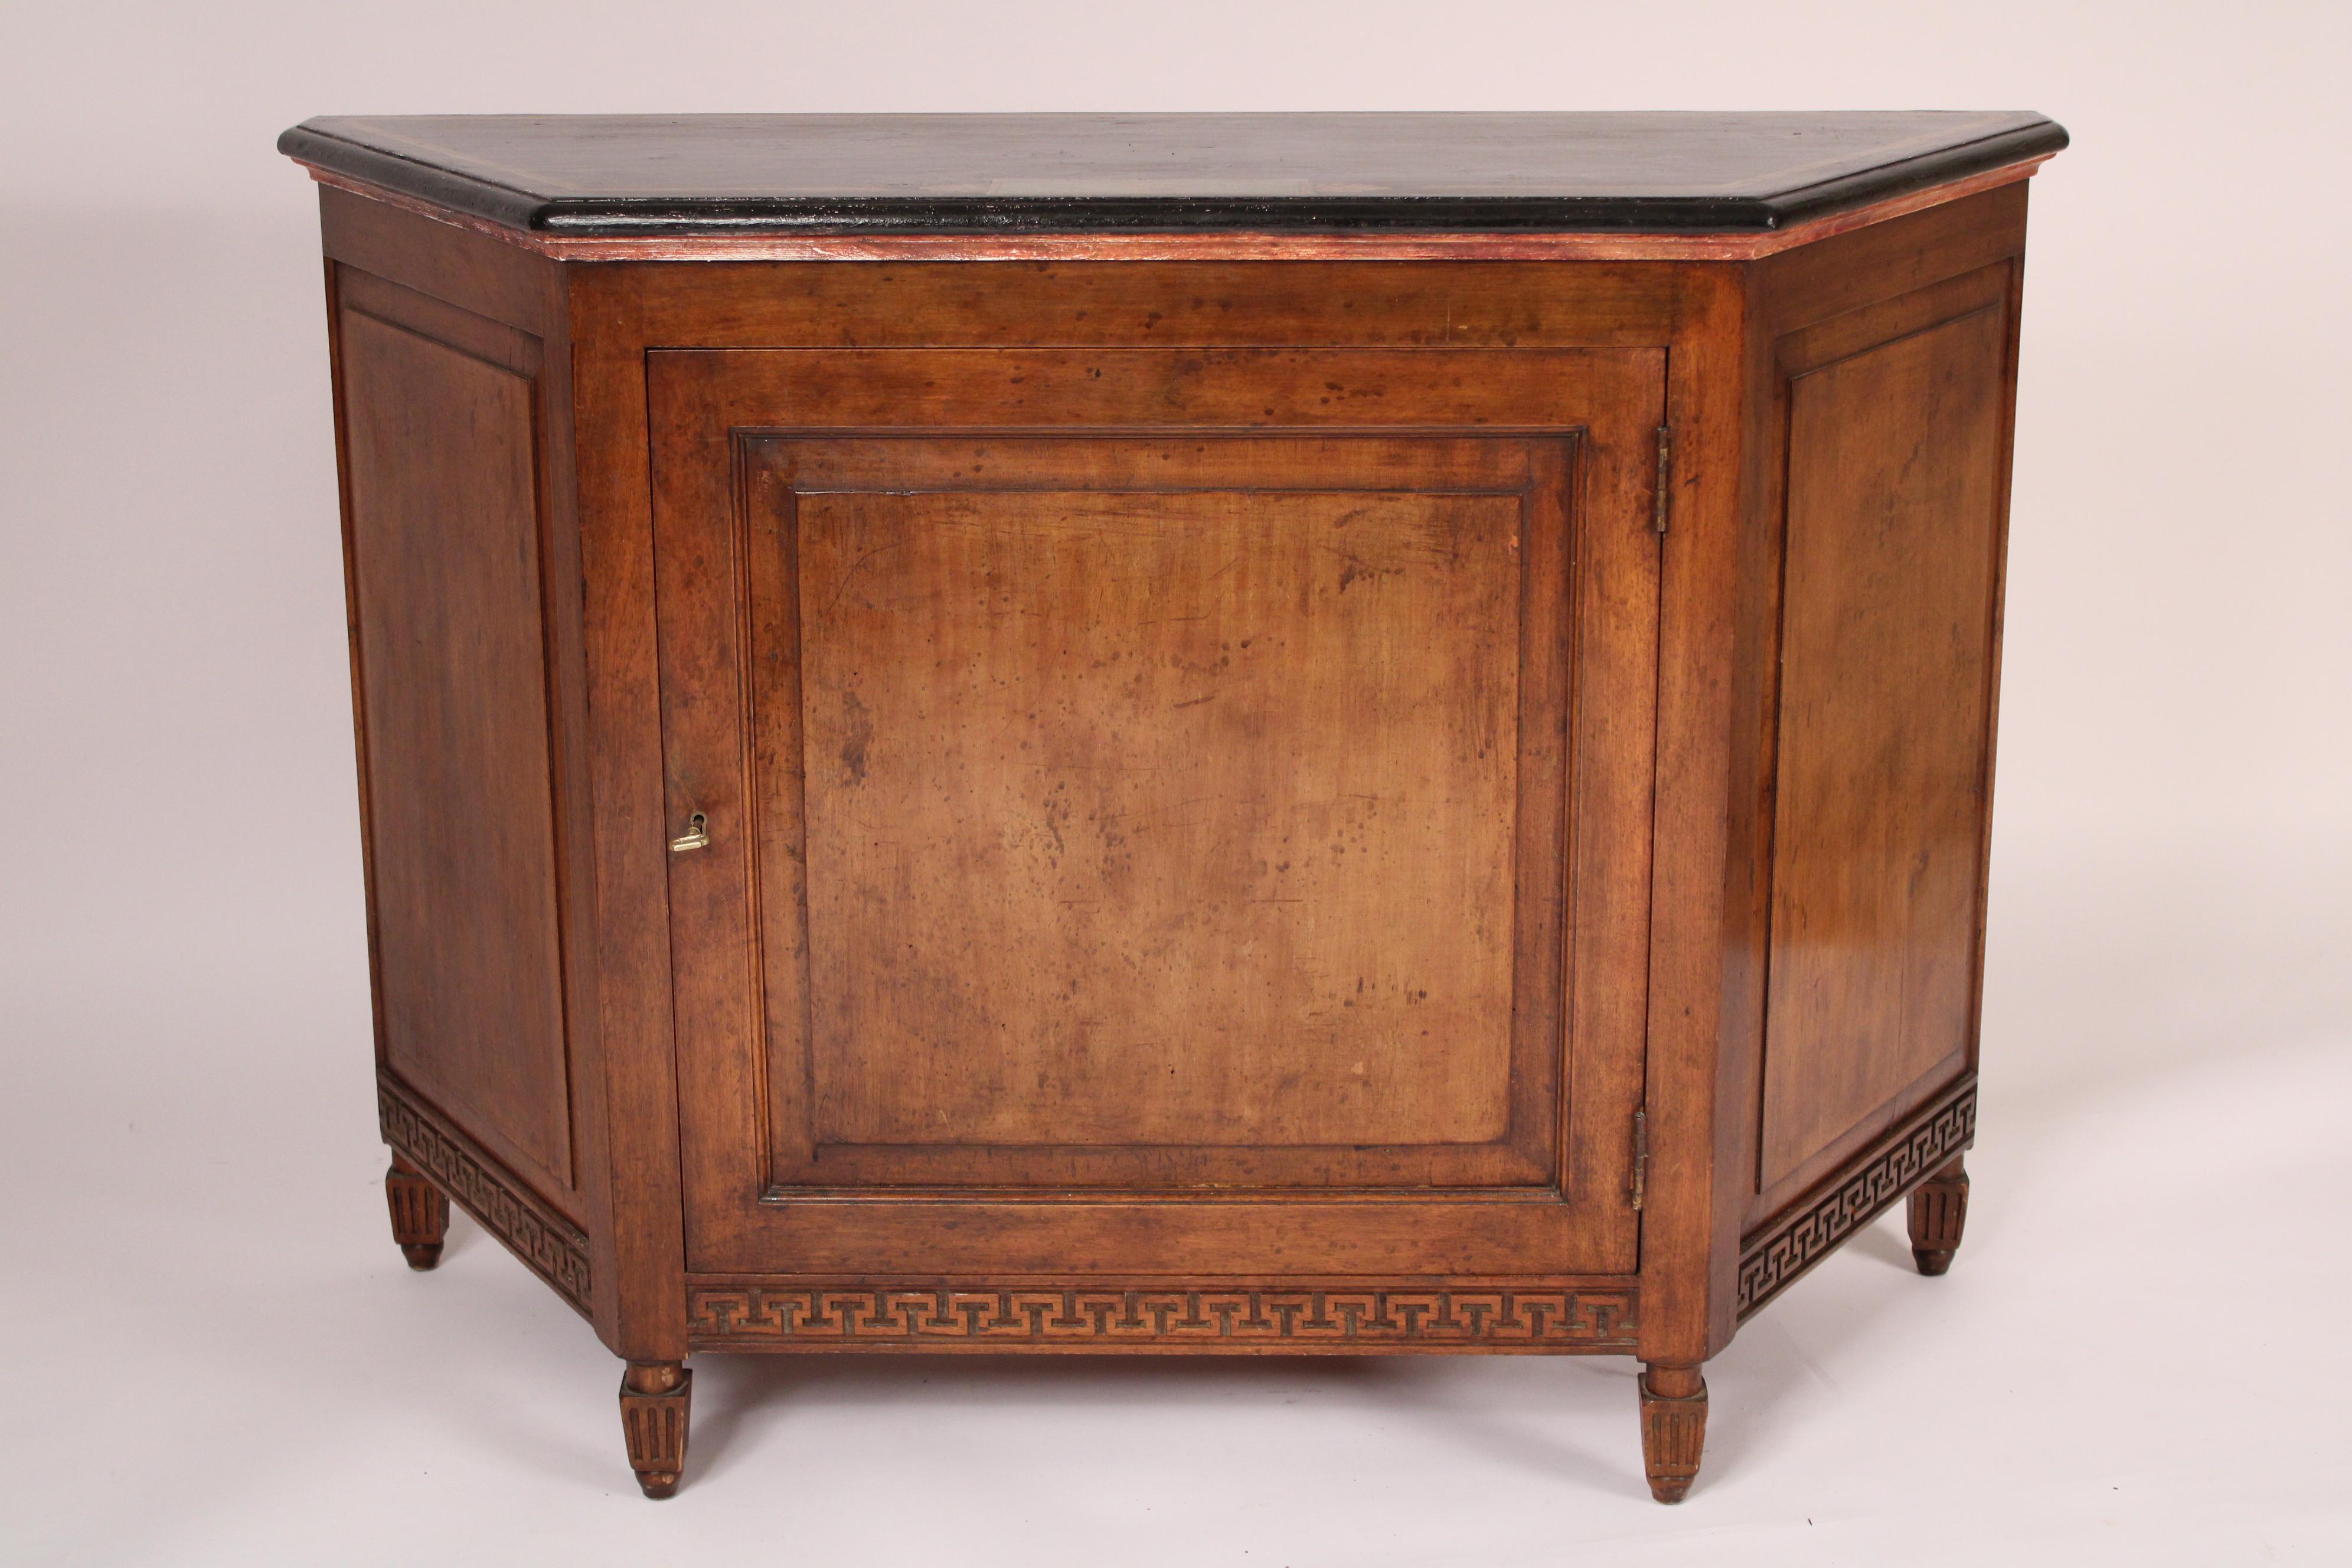 Neo classical style mahogany cabinet with a painted top, circa 1930's. With a painted top over a paneled door and paneled sides, the apron with Greek key design, resting on petite square tapered fluted legs. The mahogany has excellent color. 